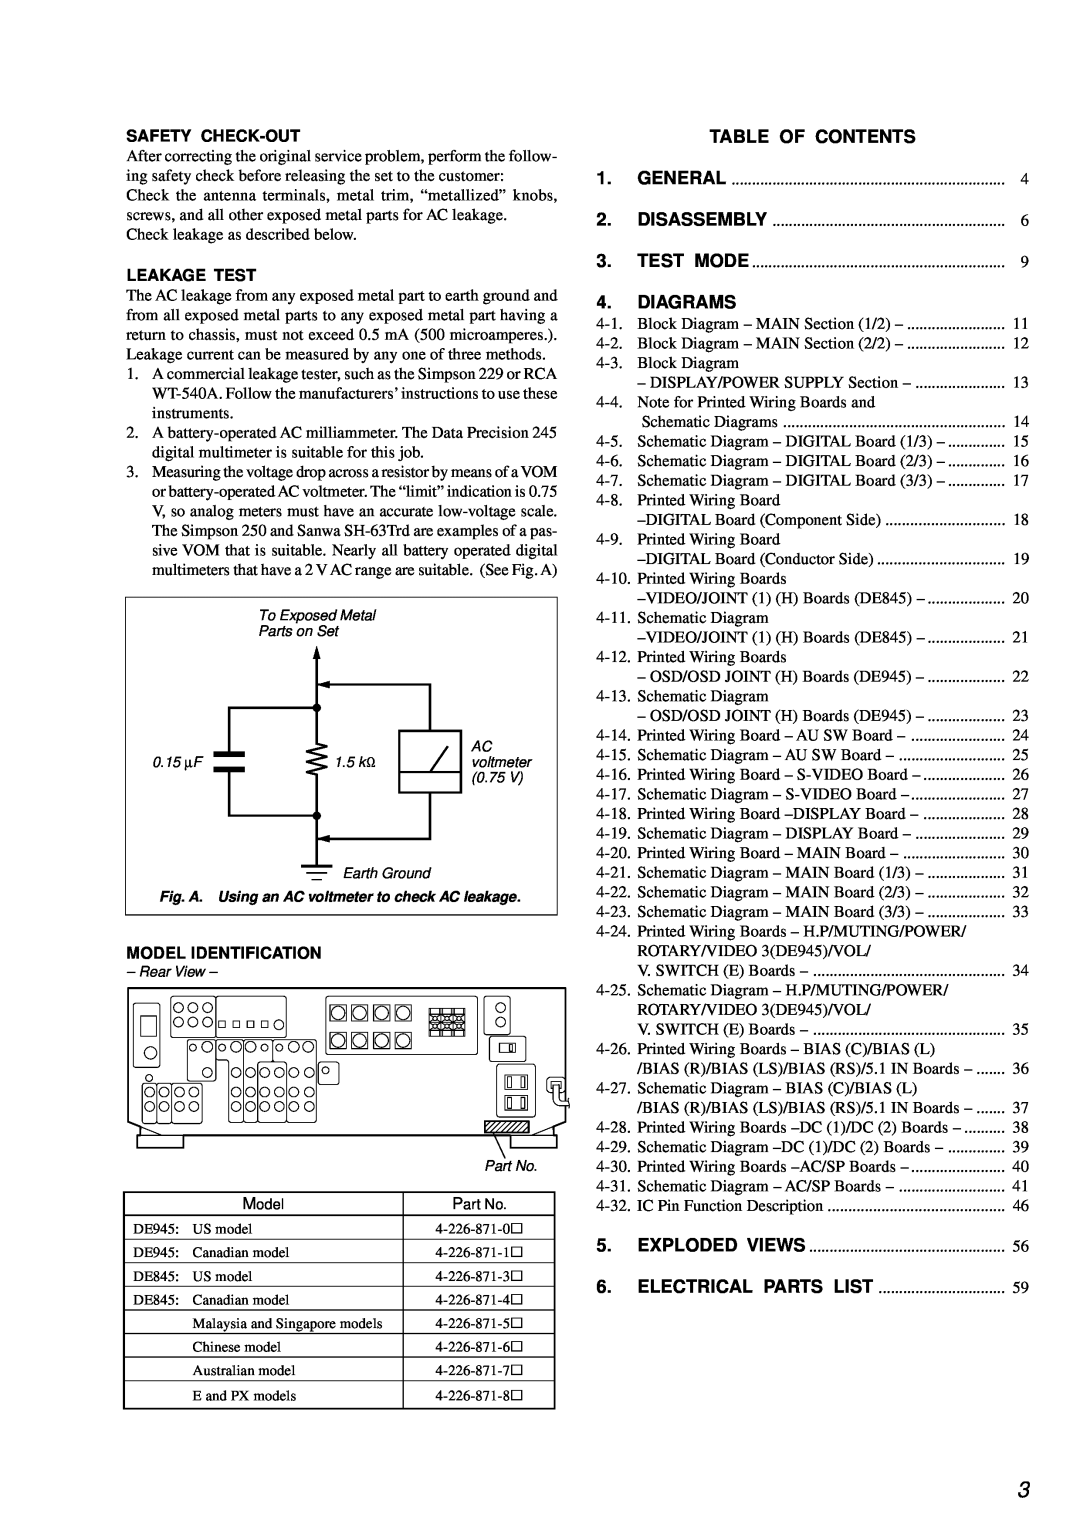 Sony STR-DE845 Table Of Contents, Diagrams, Safety Check-Out, Leakage Test, Model Identification, General, Disassembly 